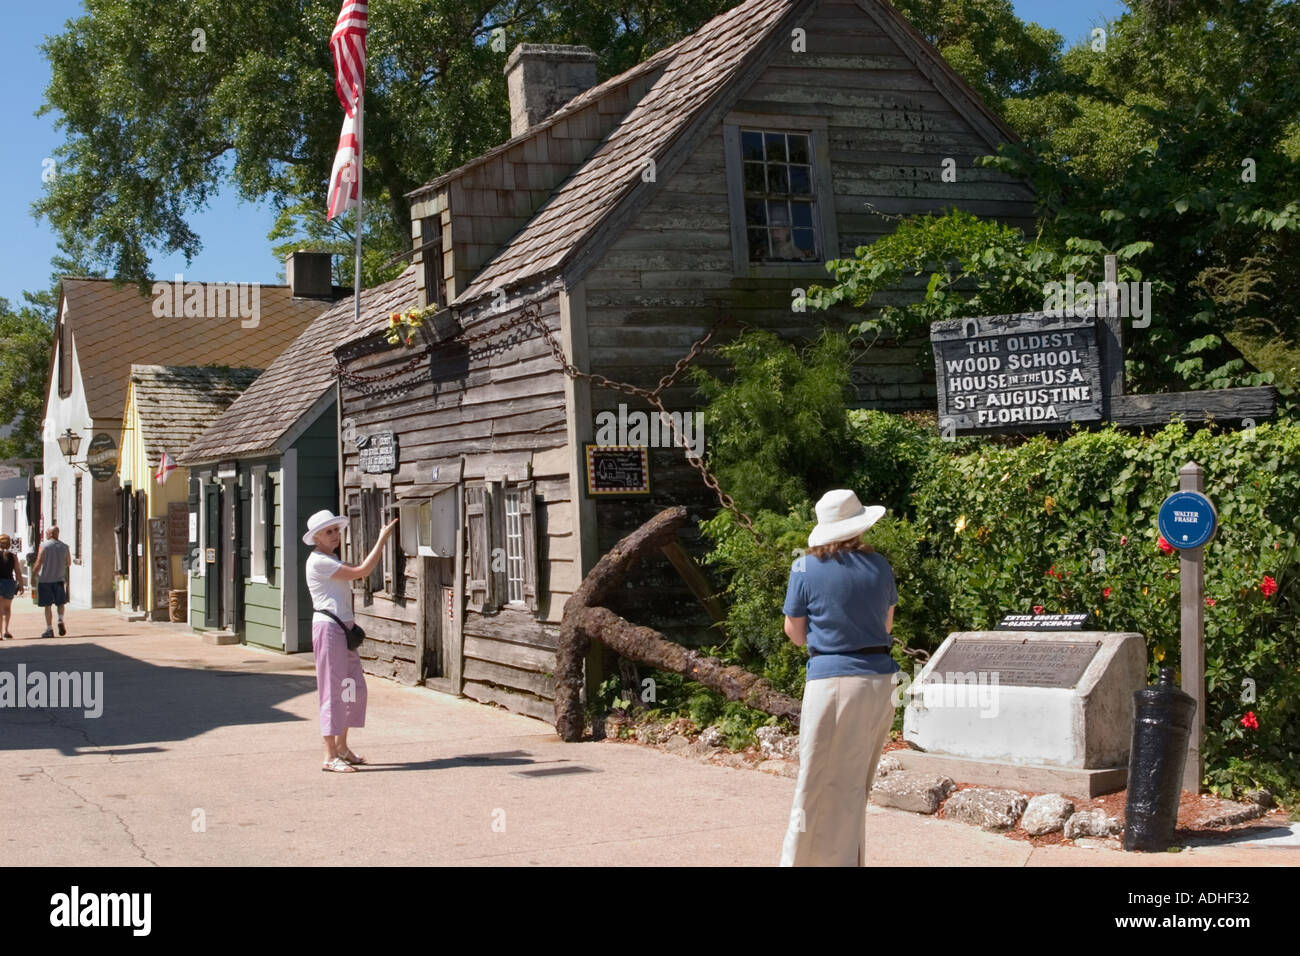 The Oldest wood school house in the USA St George Street St Augustine Florida USA Stock Photo